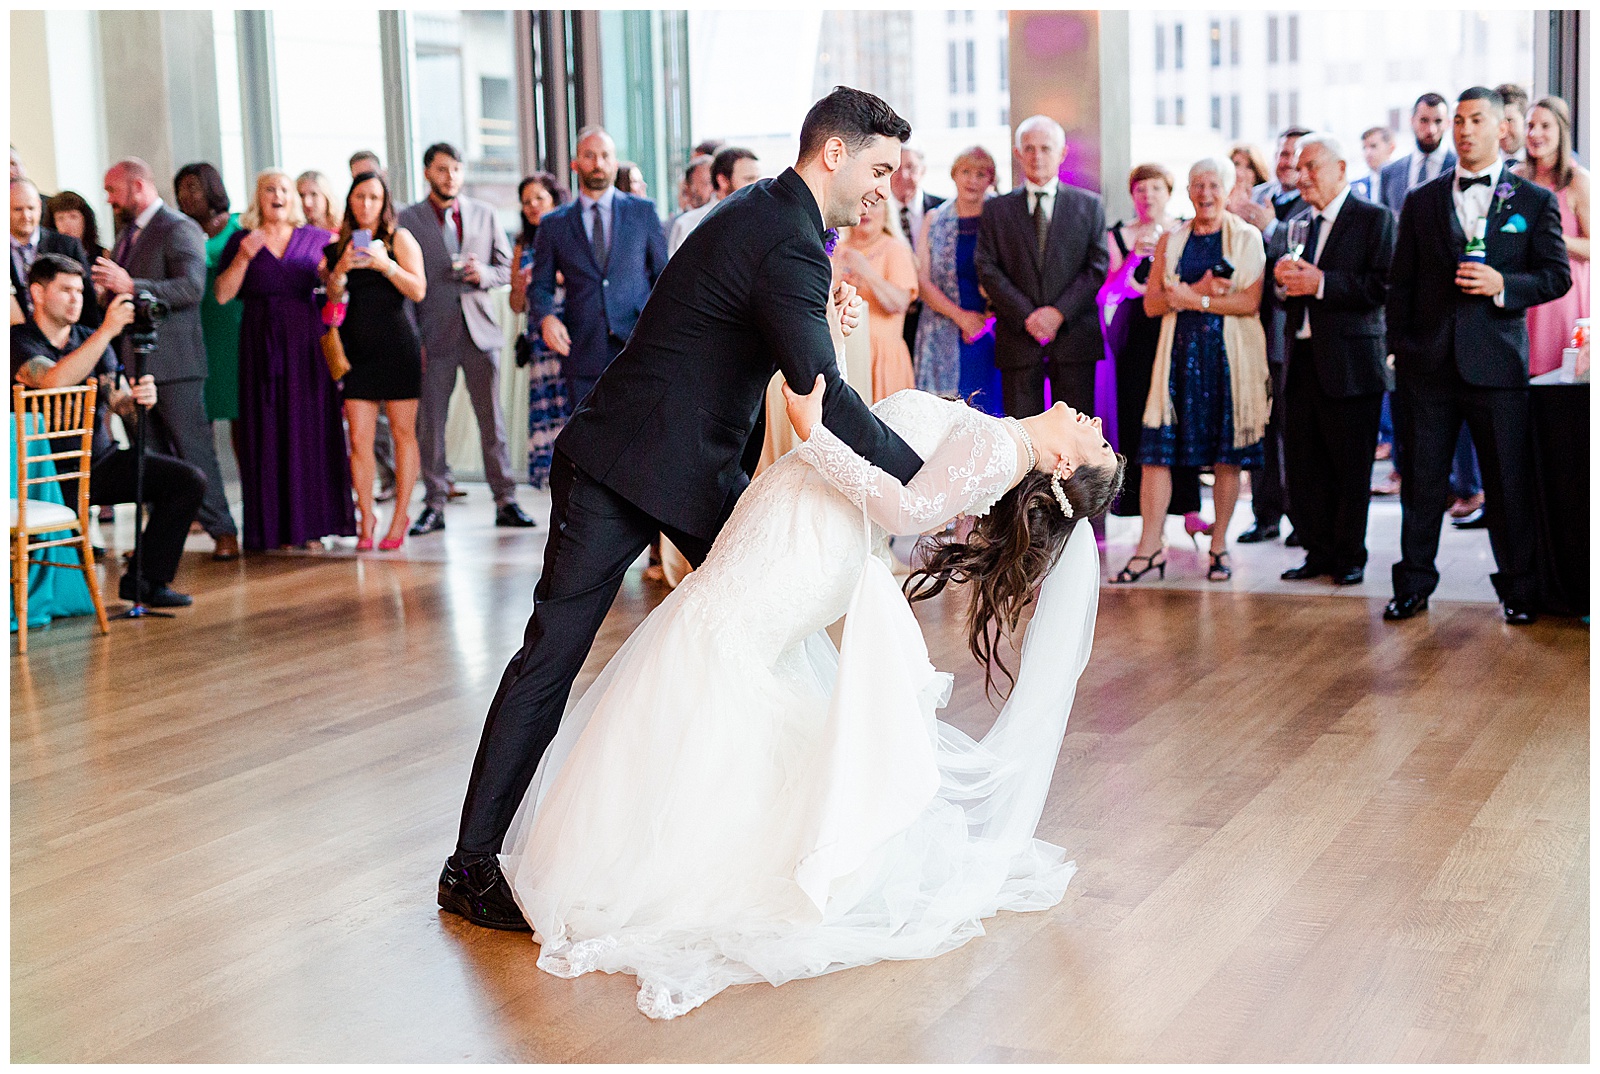 💍 bride groom first dance indoor wedding reception 👰 Bride: lace wedding dress with rhinestone belt rhinestone barrette in hair down with pearls 🤵 Groom: black tux tuxedo and purple flower boutonnière 💍 Bright Colorful Summer City Wedding in Charlotte, NC with Taryn and Ryan | Kevyn Dixon Photography